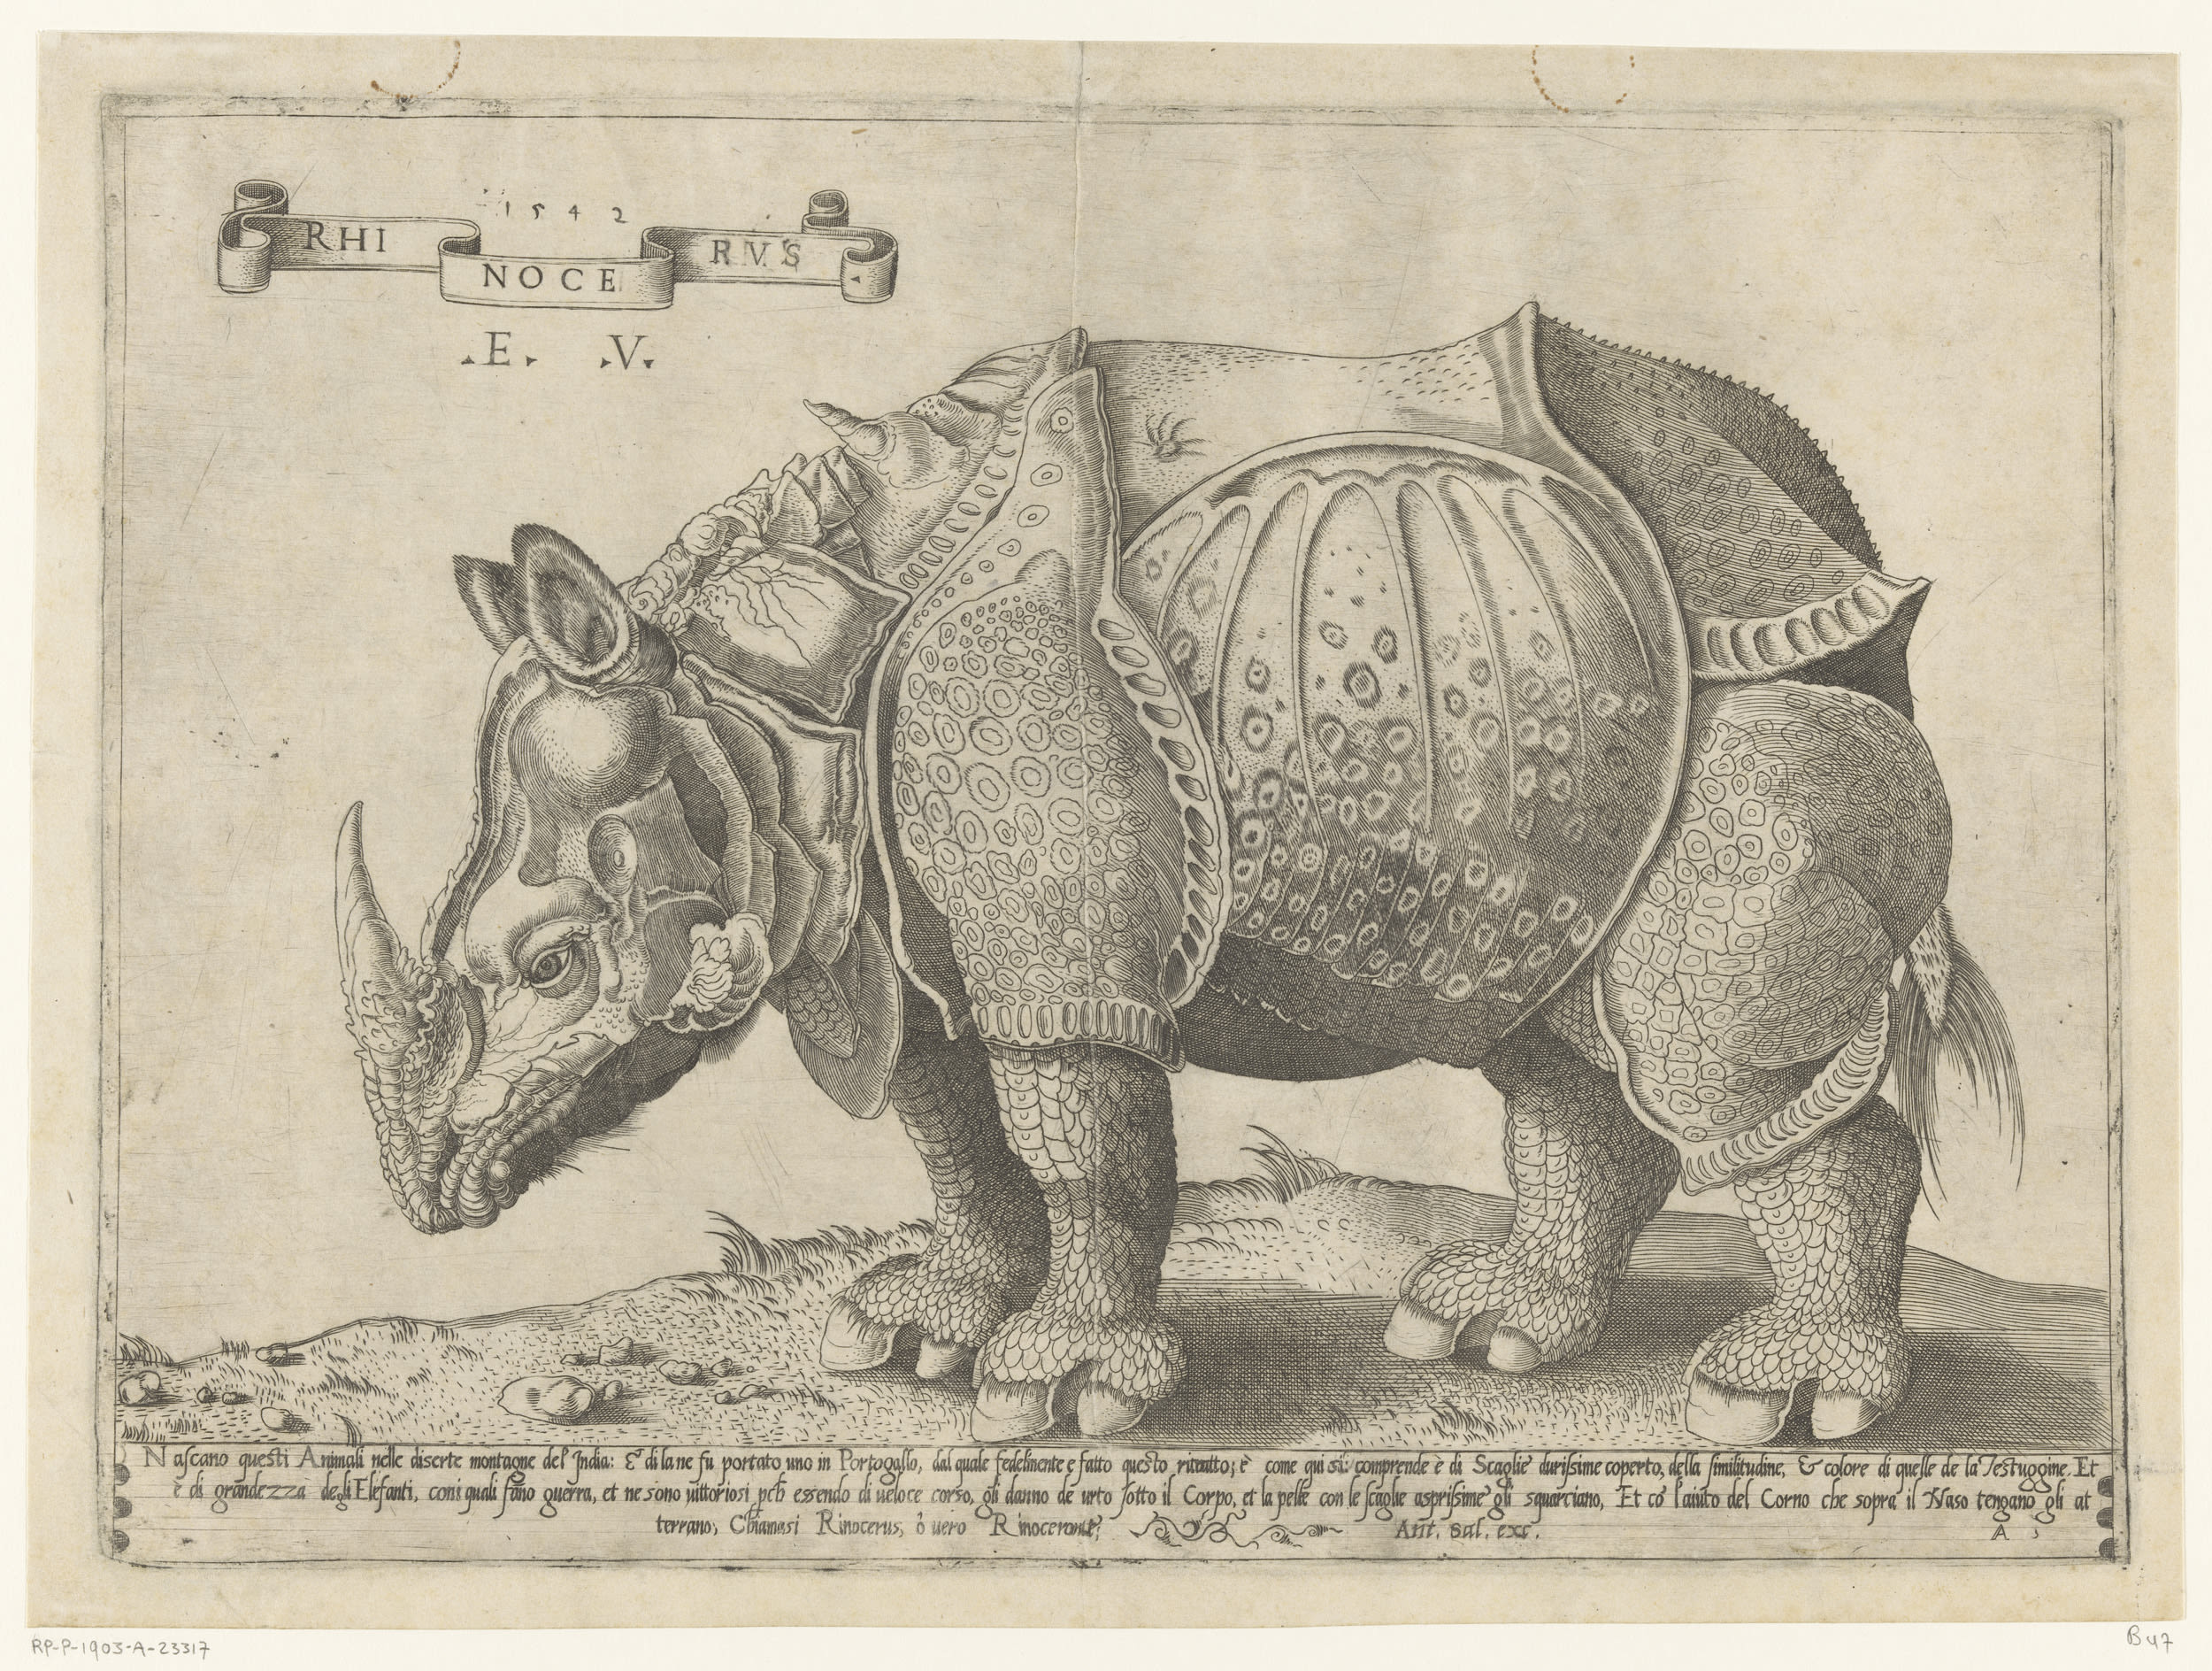 black and white illustration of a rhinoceros, standing and facing left.